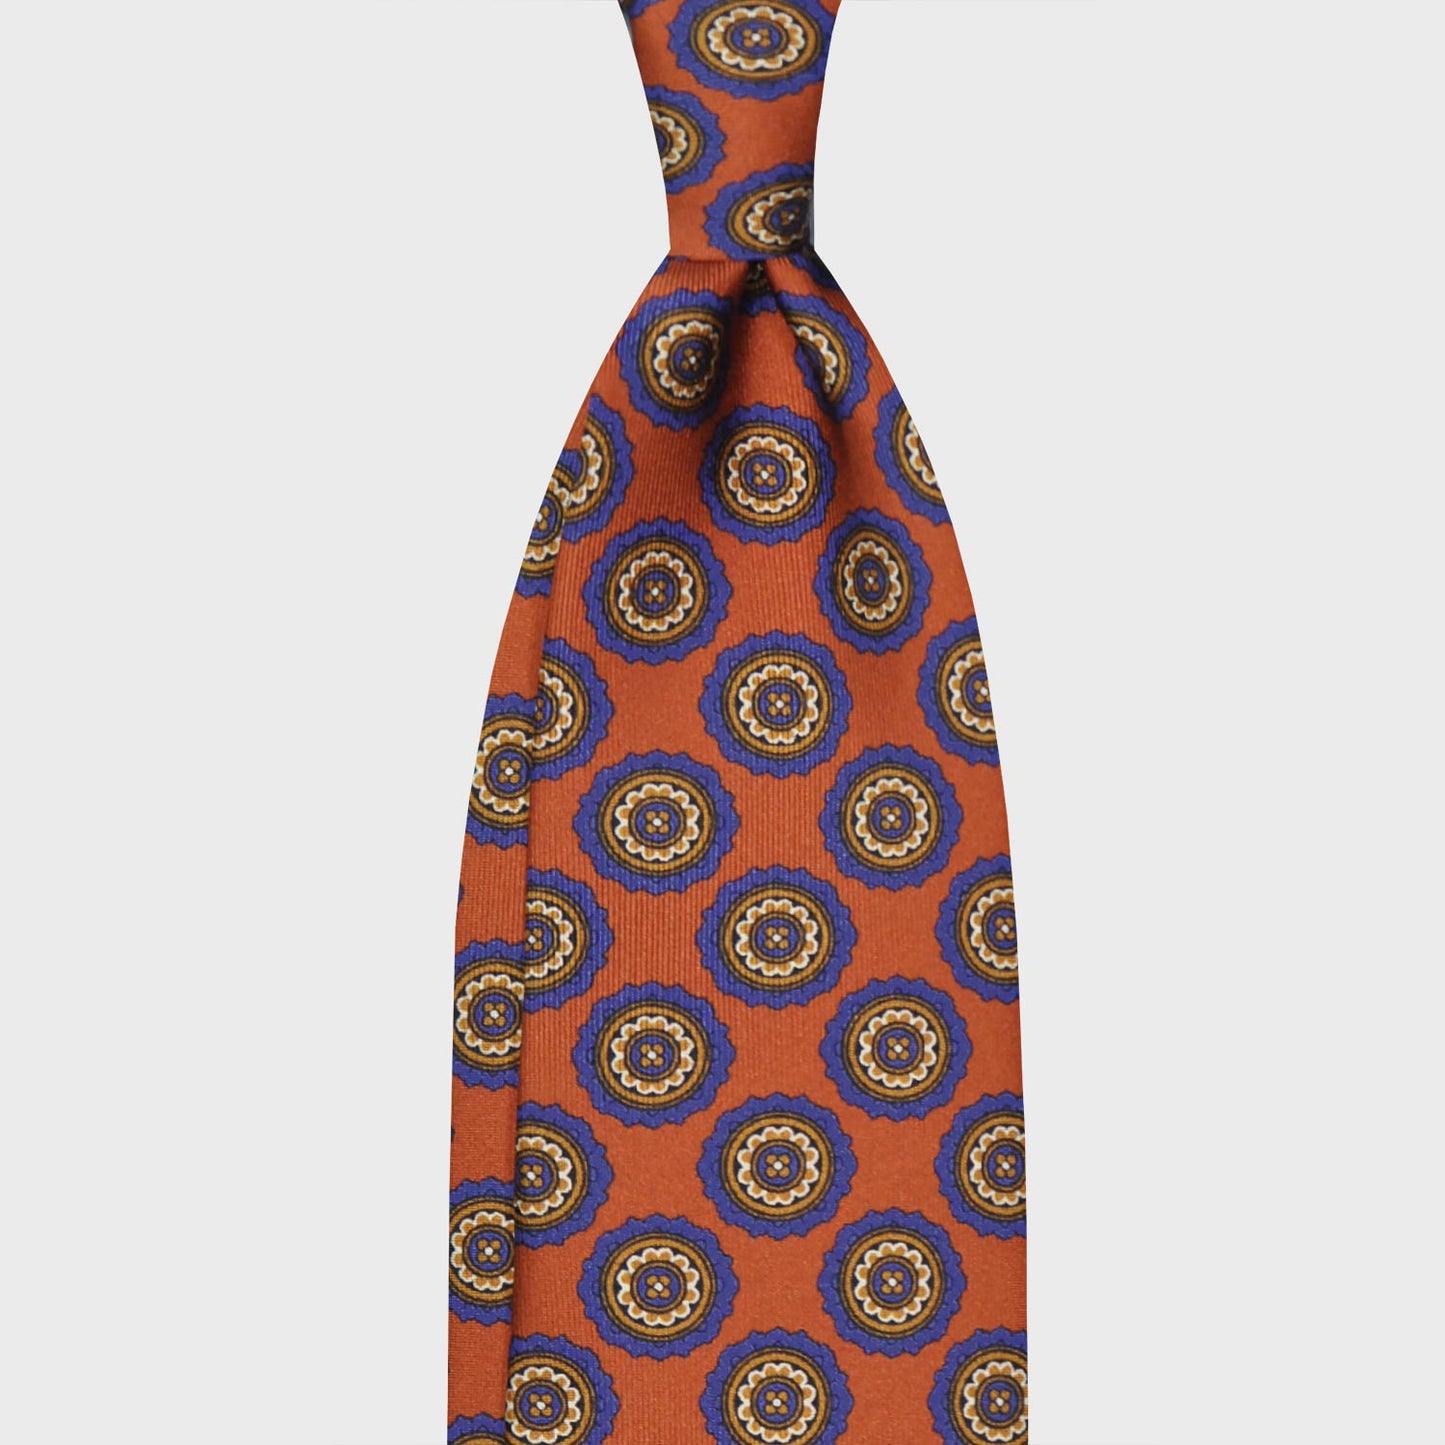 Orange Medallions Silk Tie. Men's orange silk tie made with finest Italian silk soft to the touch, unlined tie 3 folds, refined medallions printed pattern pervinca blue, classic handmade tie F.Marino Napoli exclusive for Wools Boutique Uomo